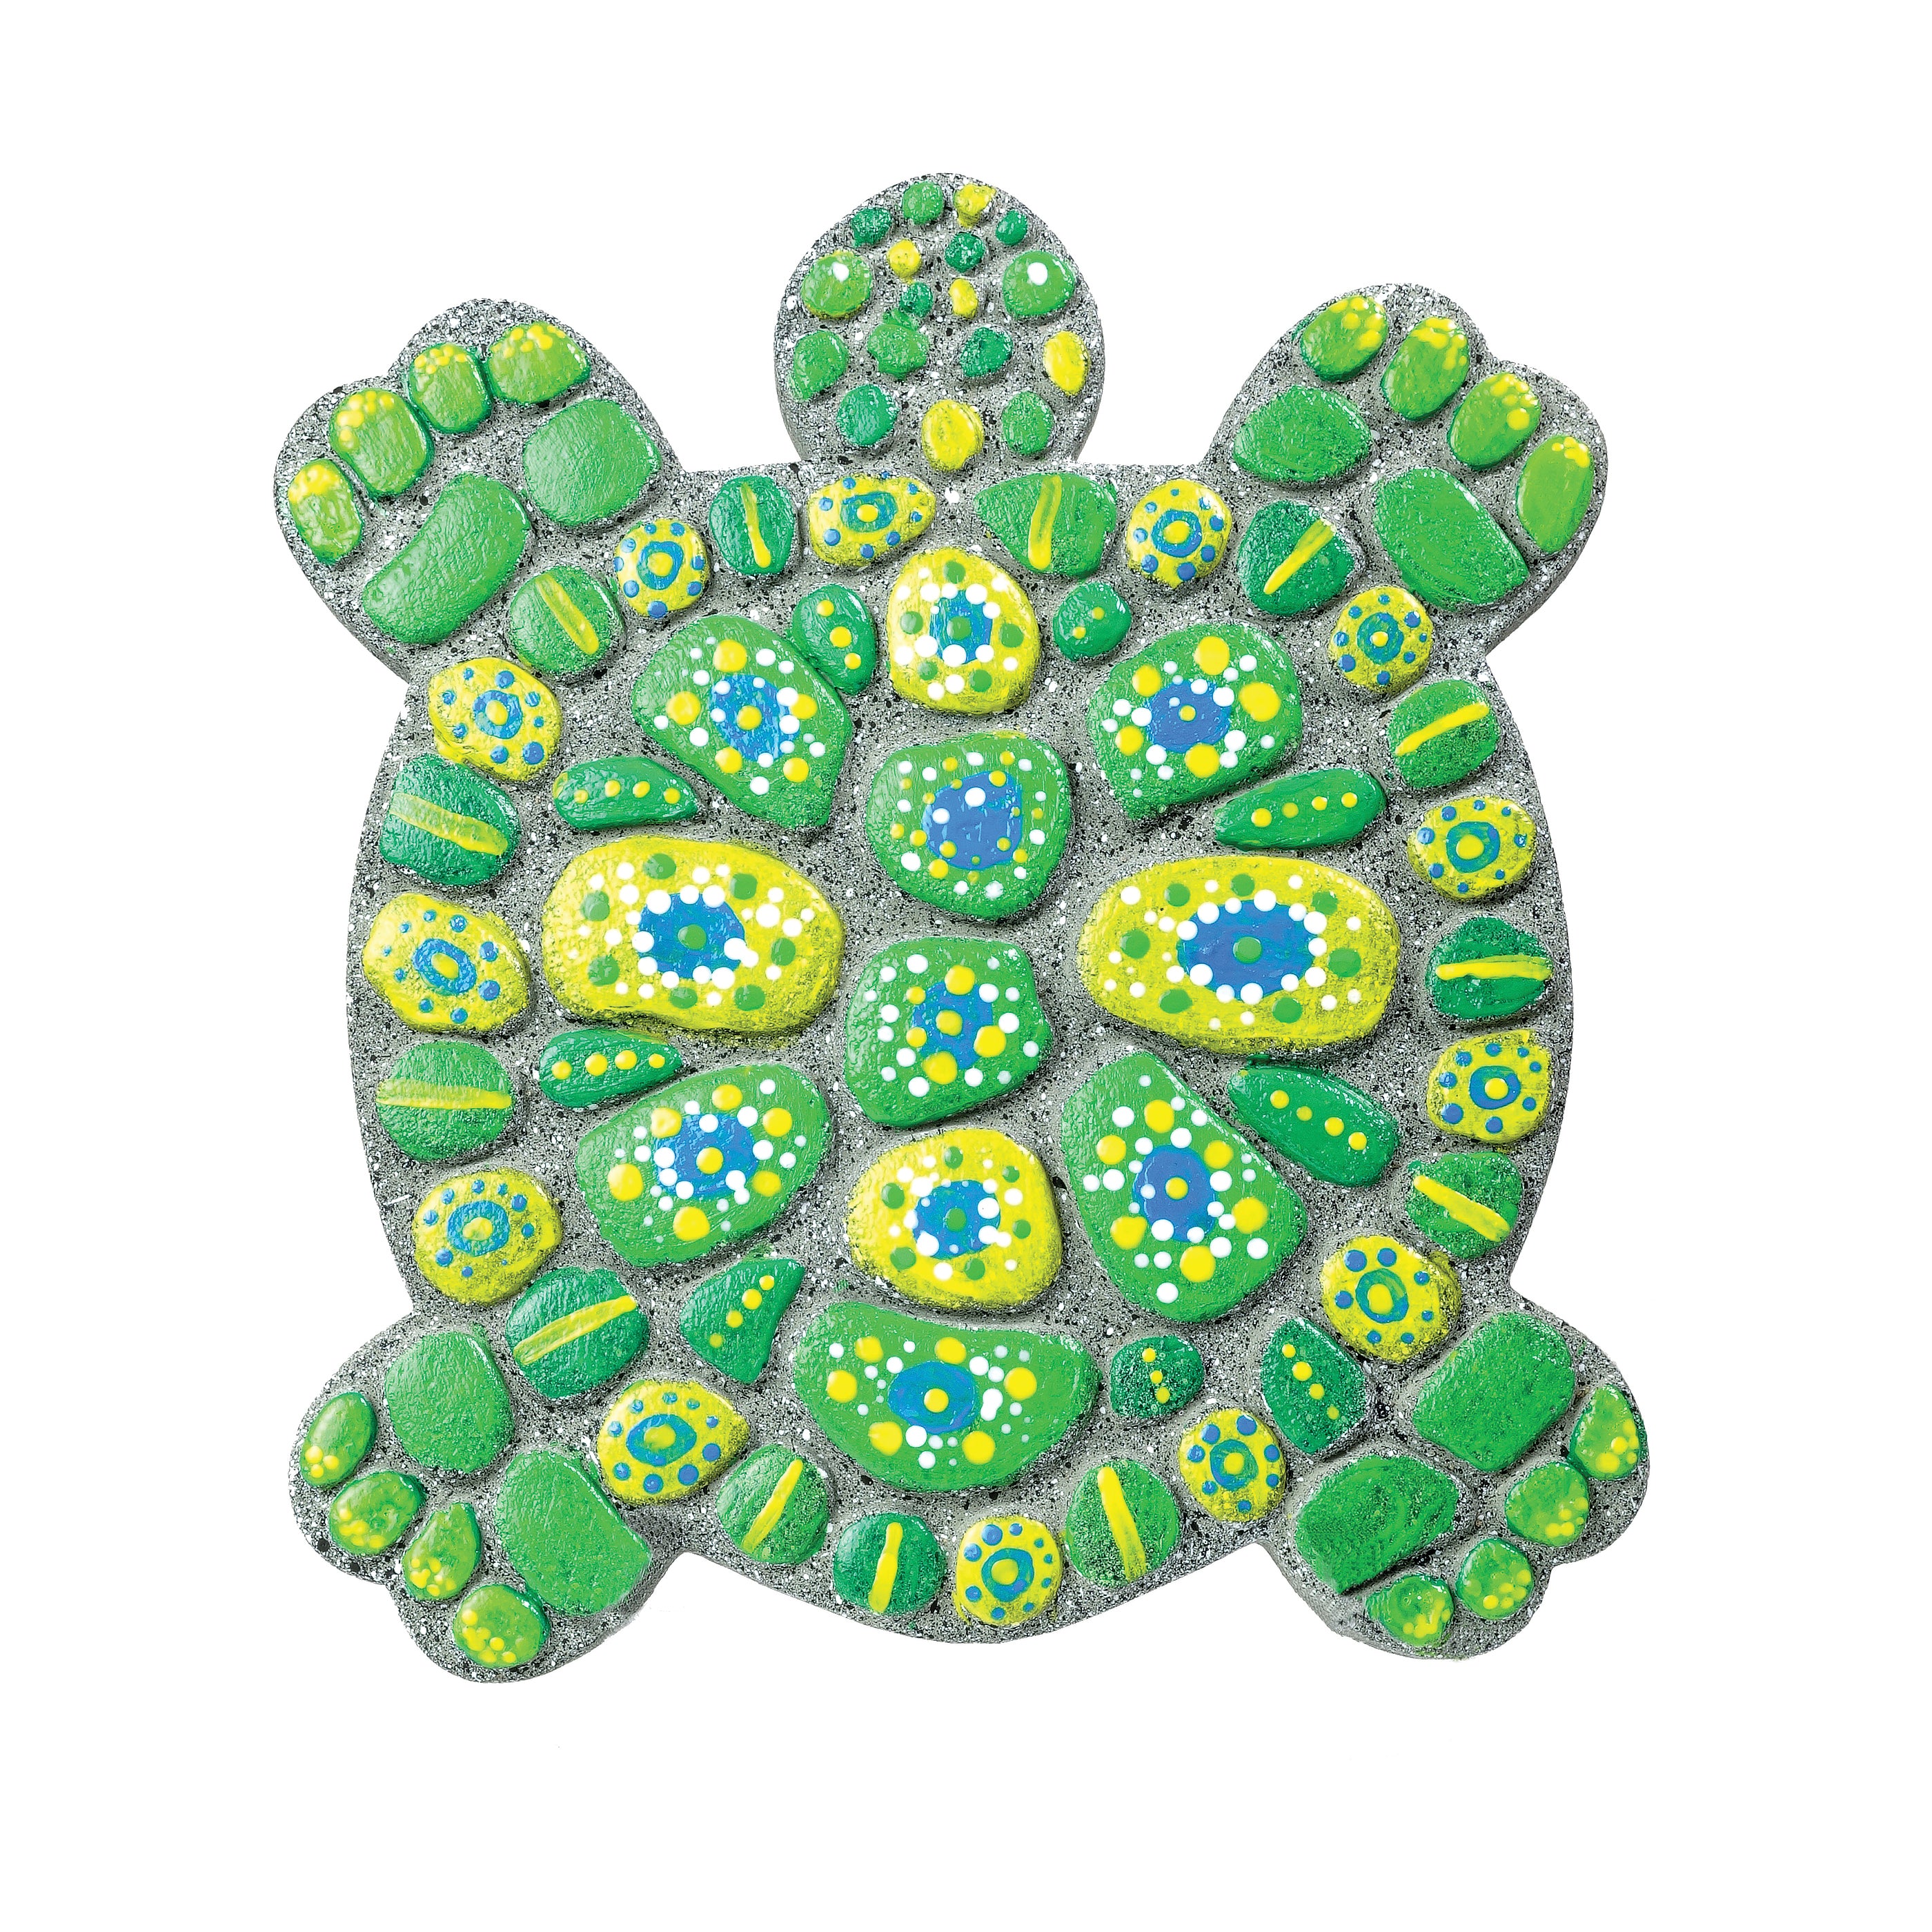 Paint Your Own Stepping Stone: Turtle